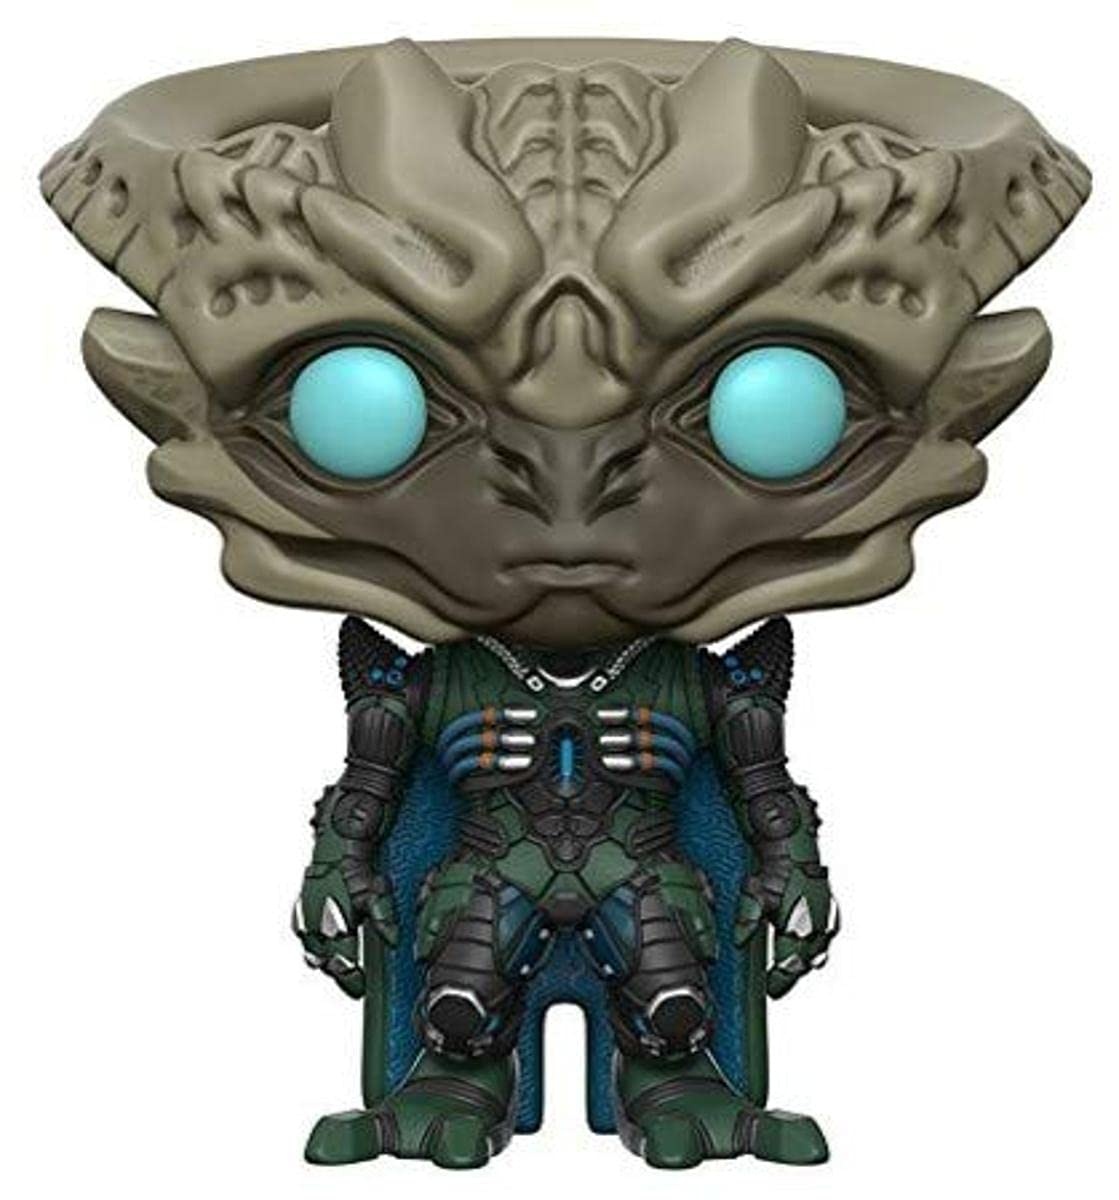 Funko 12314 Actionfigur Mass Effect Andromeda: Archon, 6 Zoll